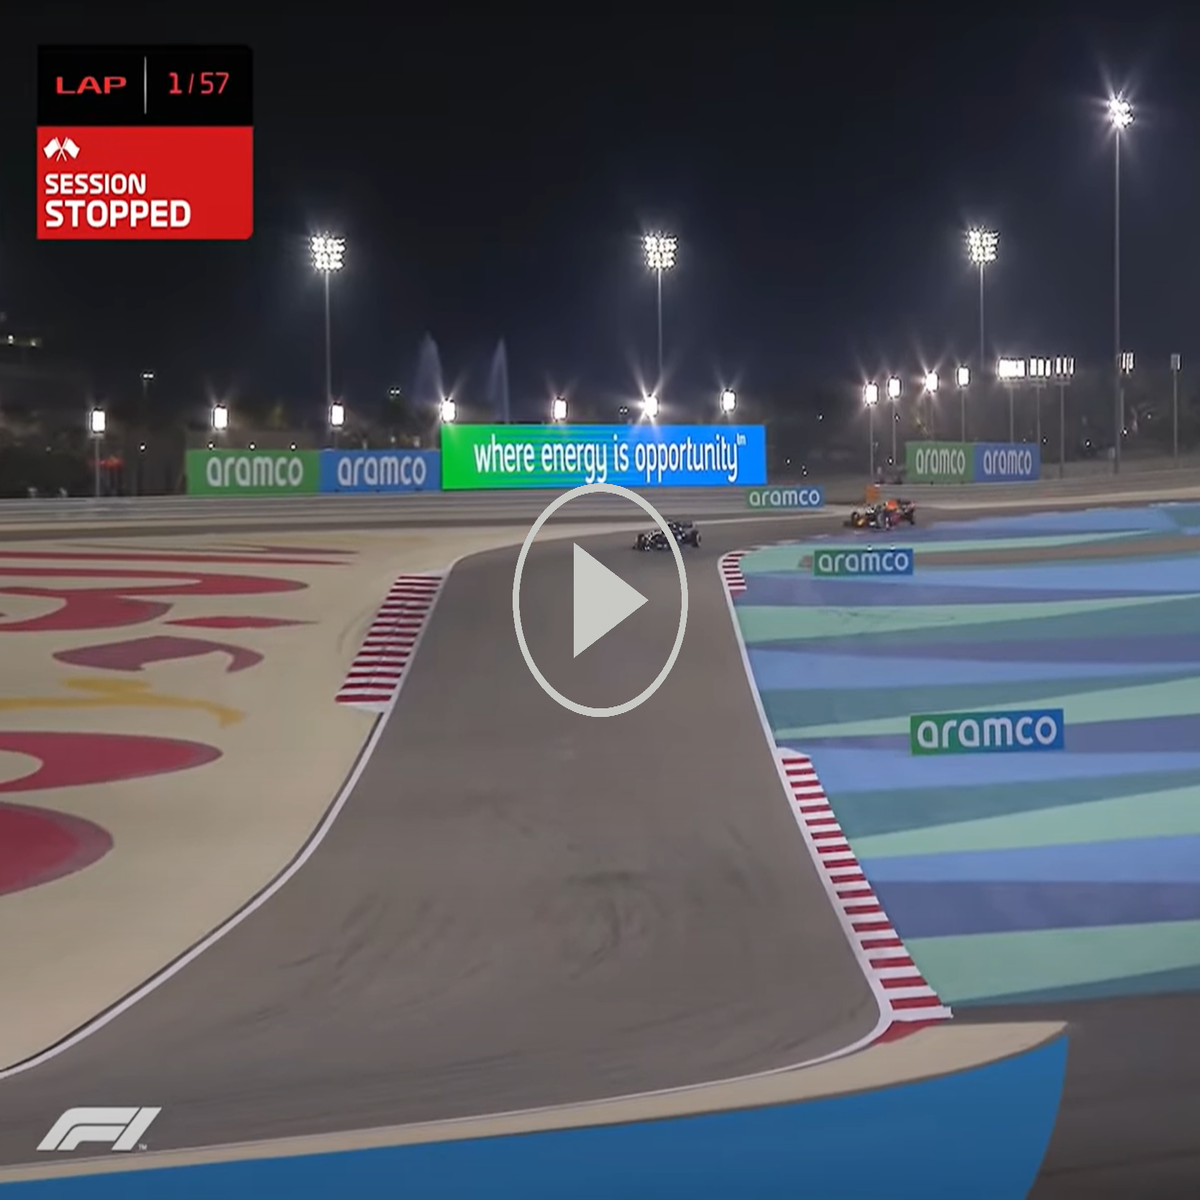 F1 live stream: Free links to watch Bahrain Grand Prix online spread  despite risks | The Independent